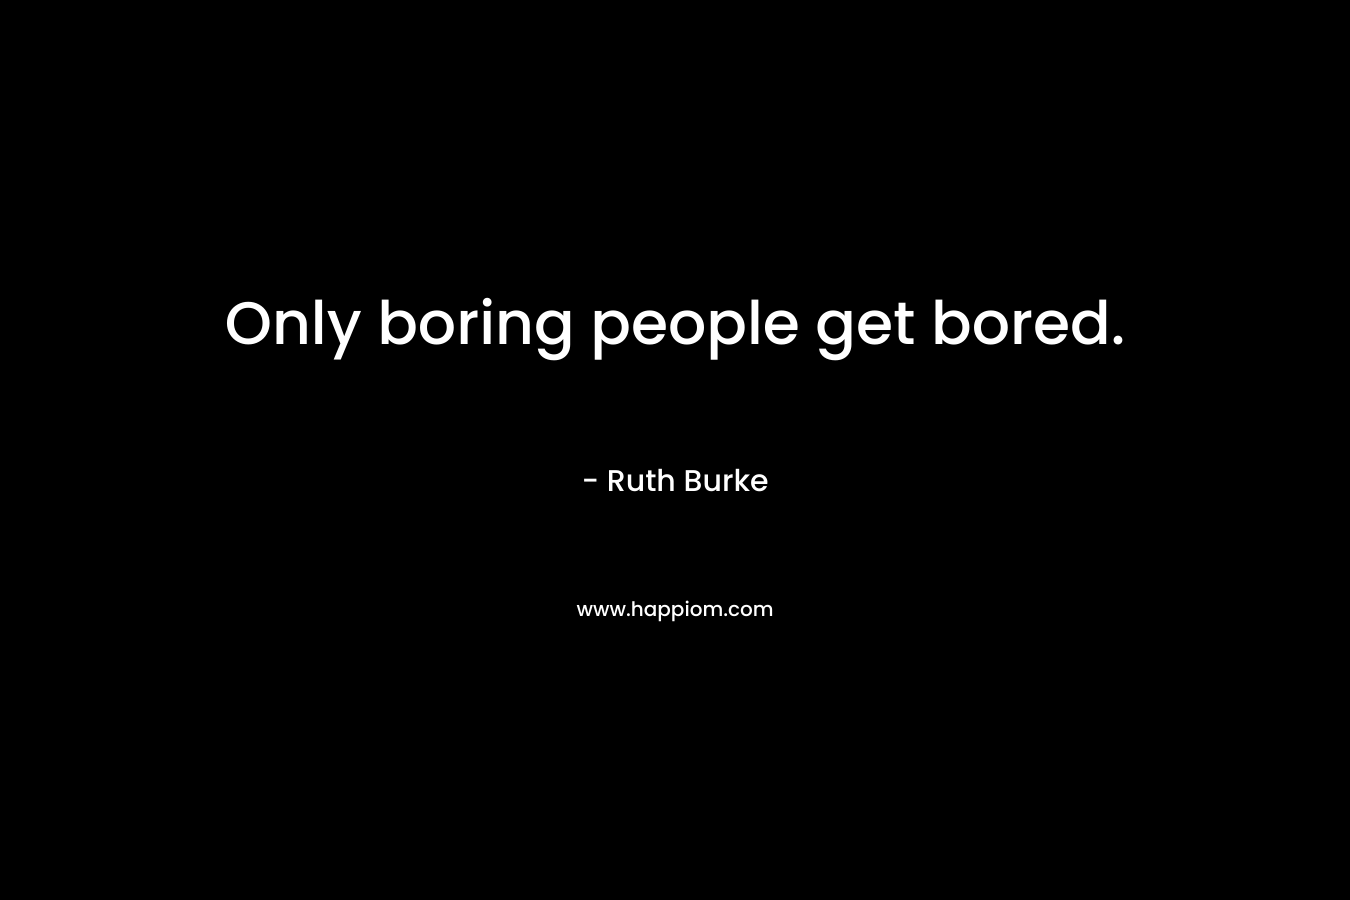 Only boring people get bored.